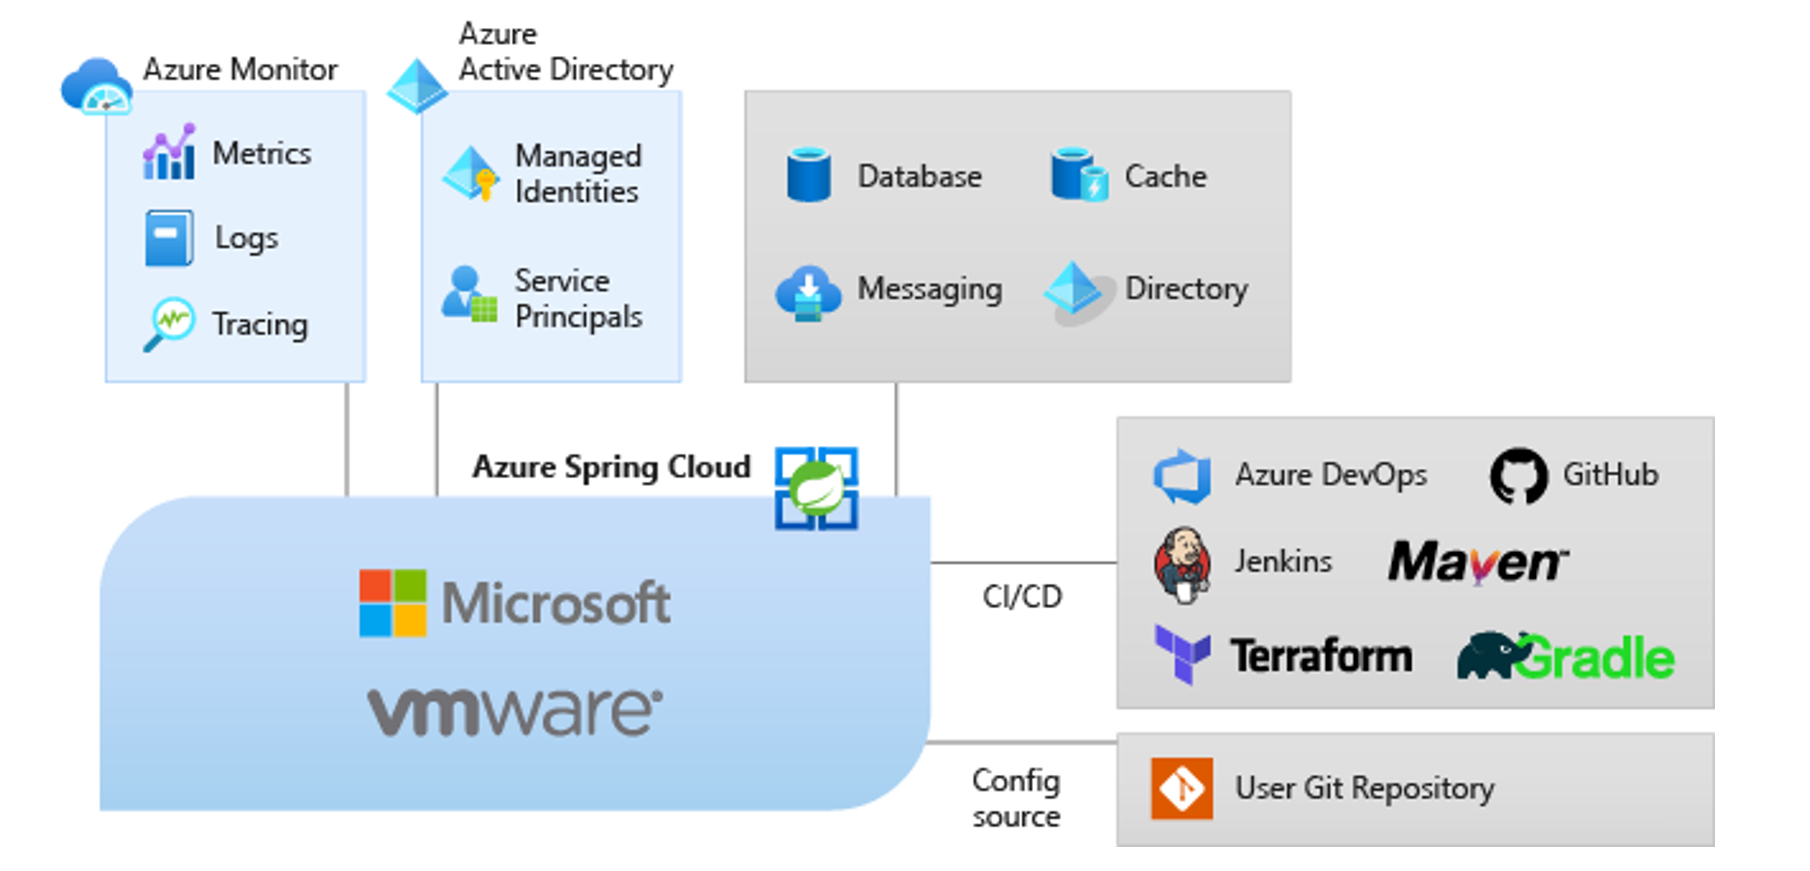 Azure Service Overview